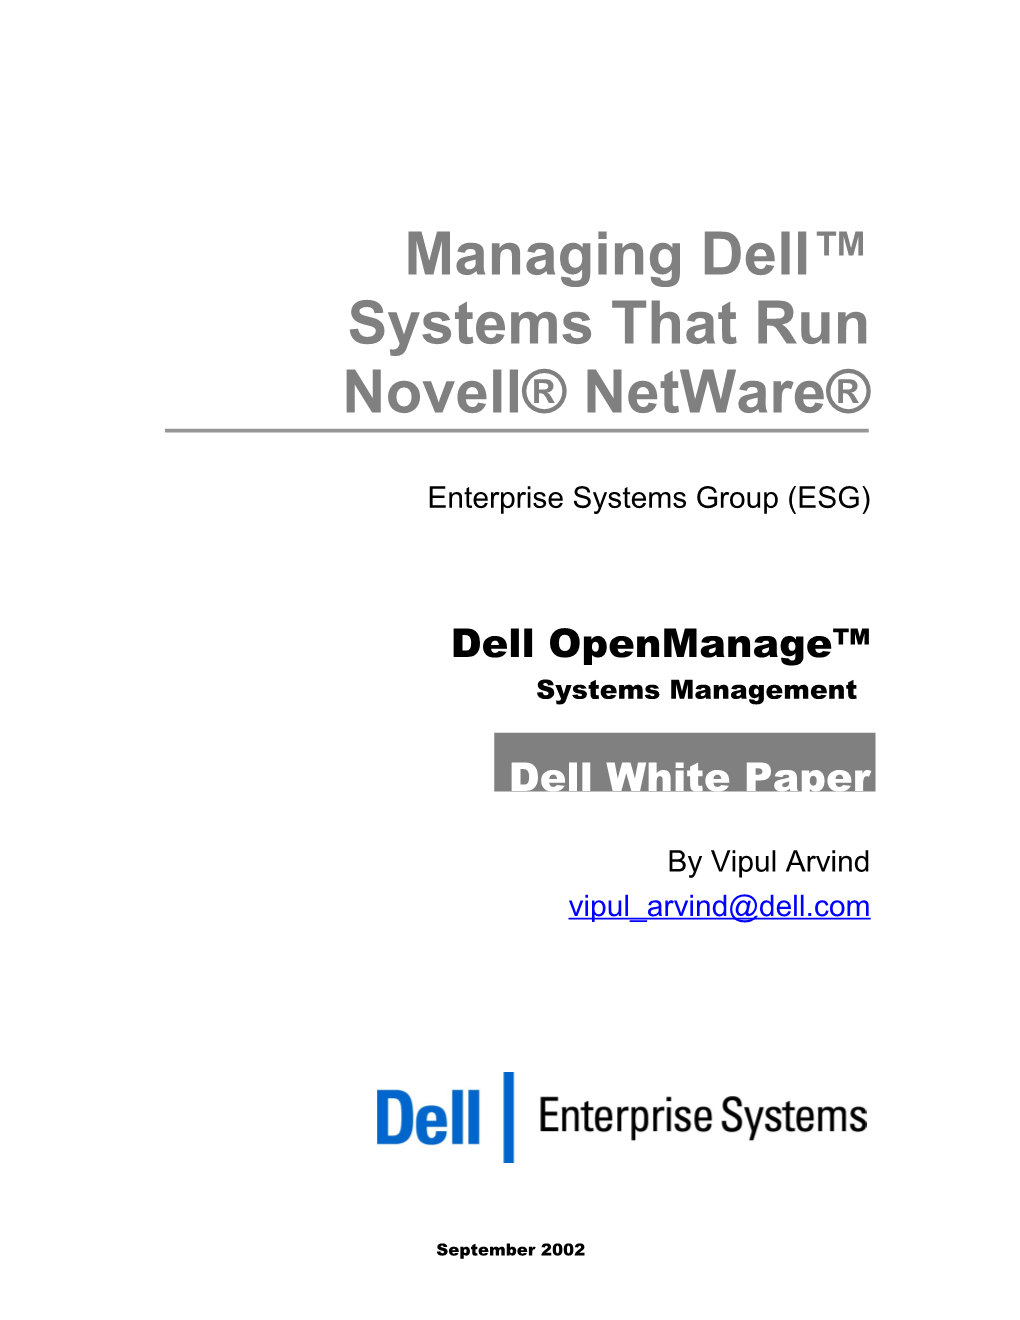 Managing Dell Systems That Run Novell Netware